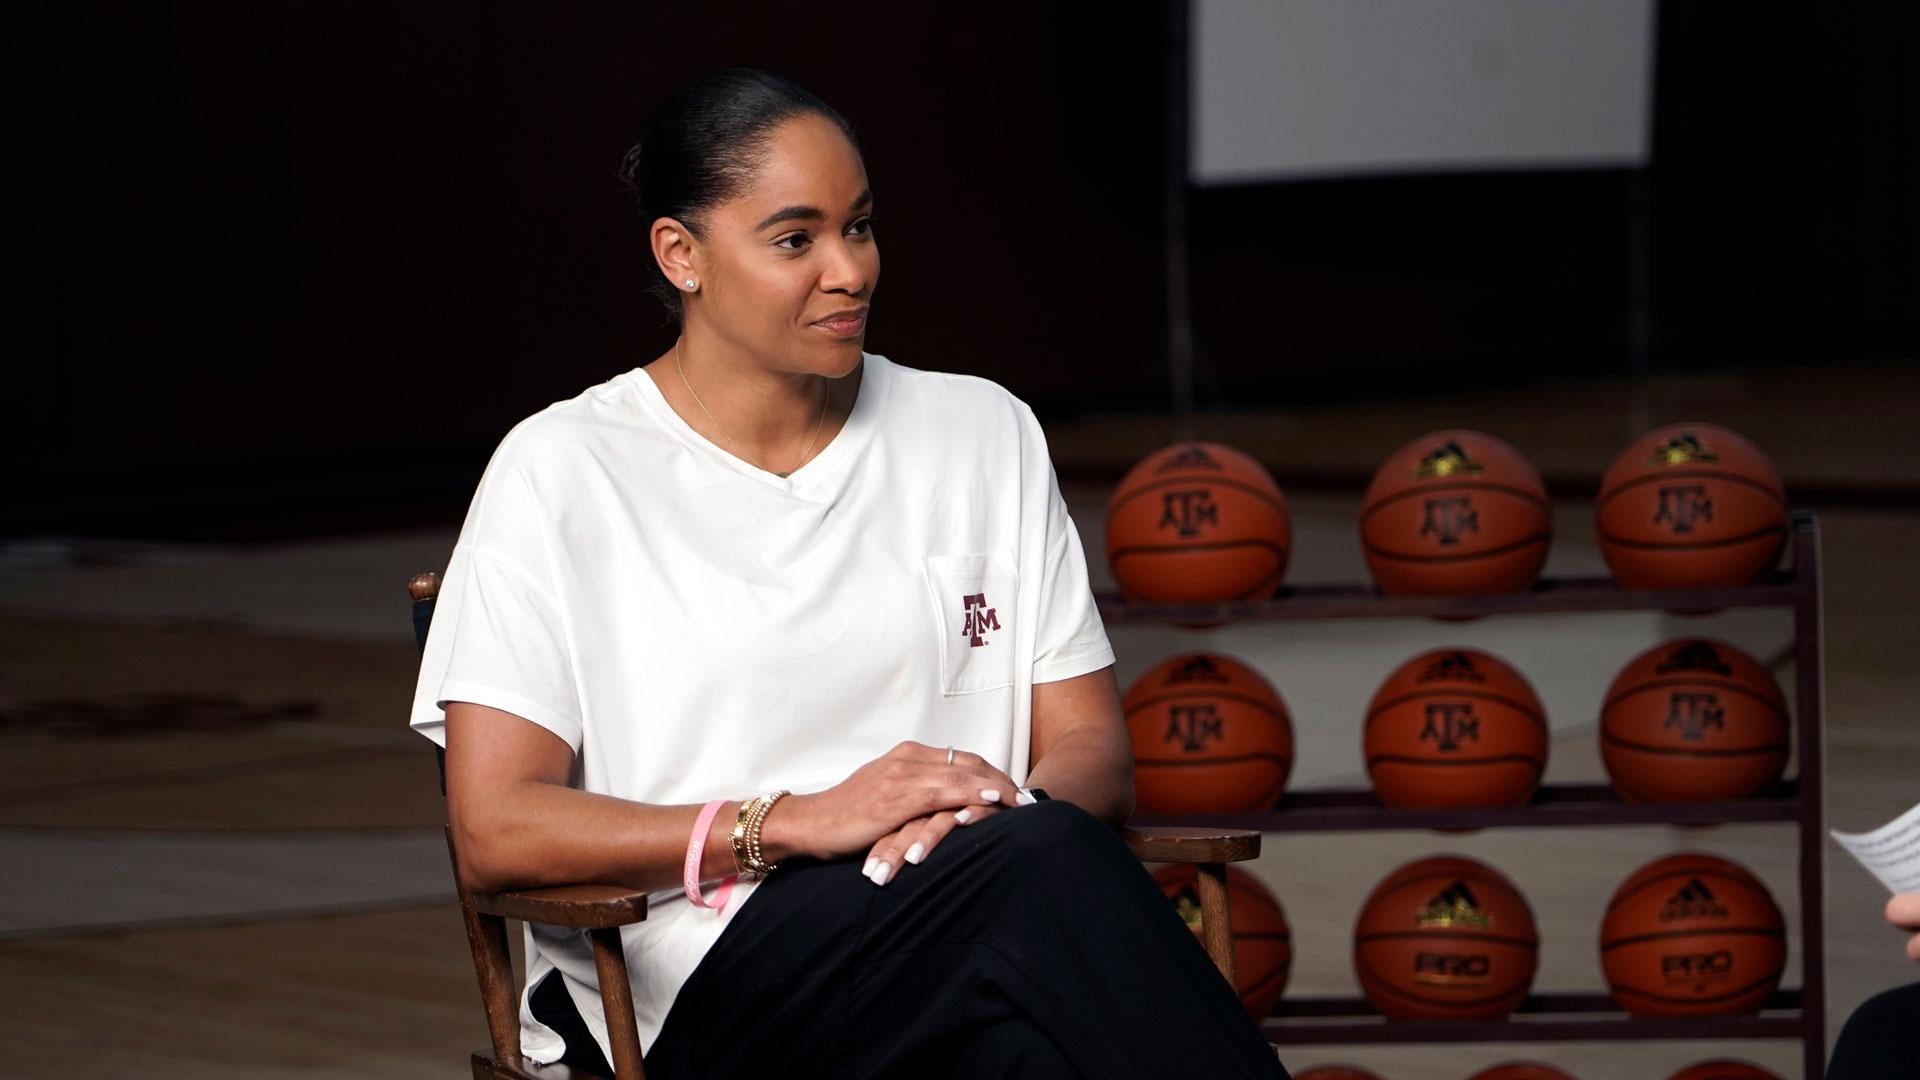 Texas A&M women's basketball head coach Joni Taylor speaks with "Texas A&M Today," as featured on Season 2.